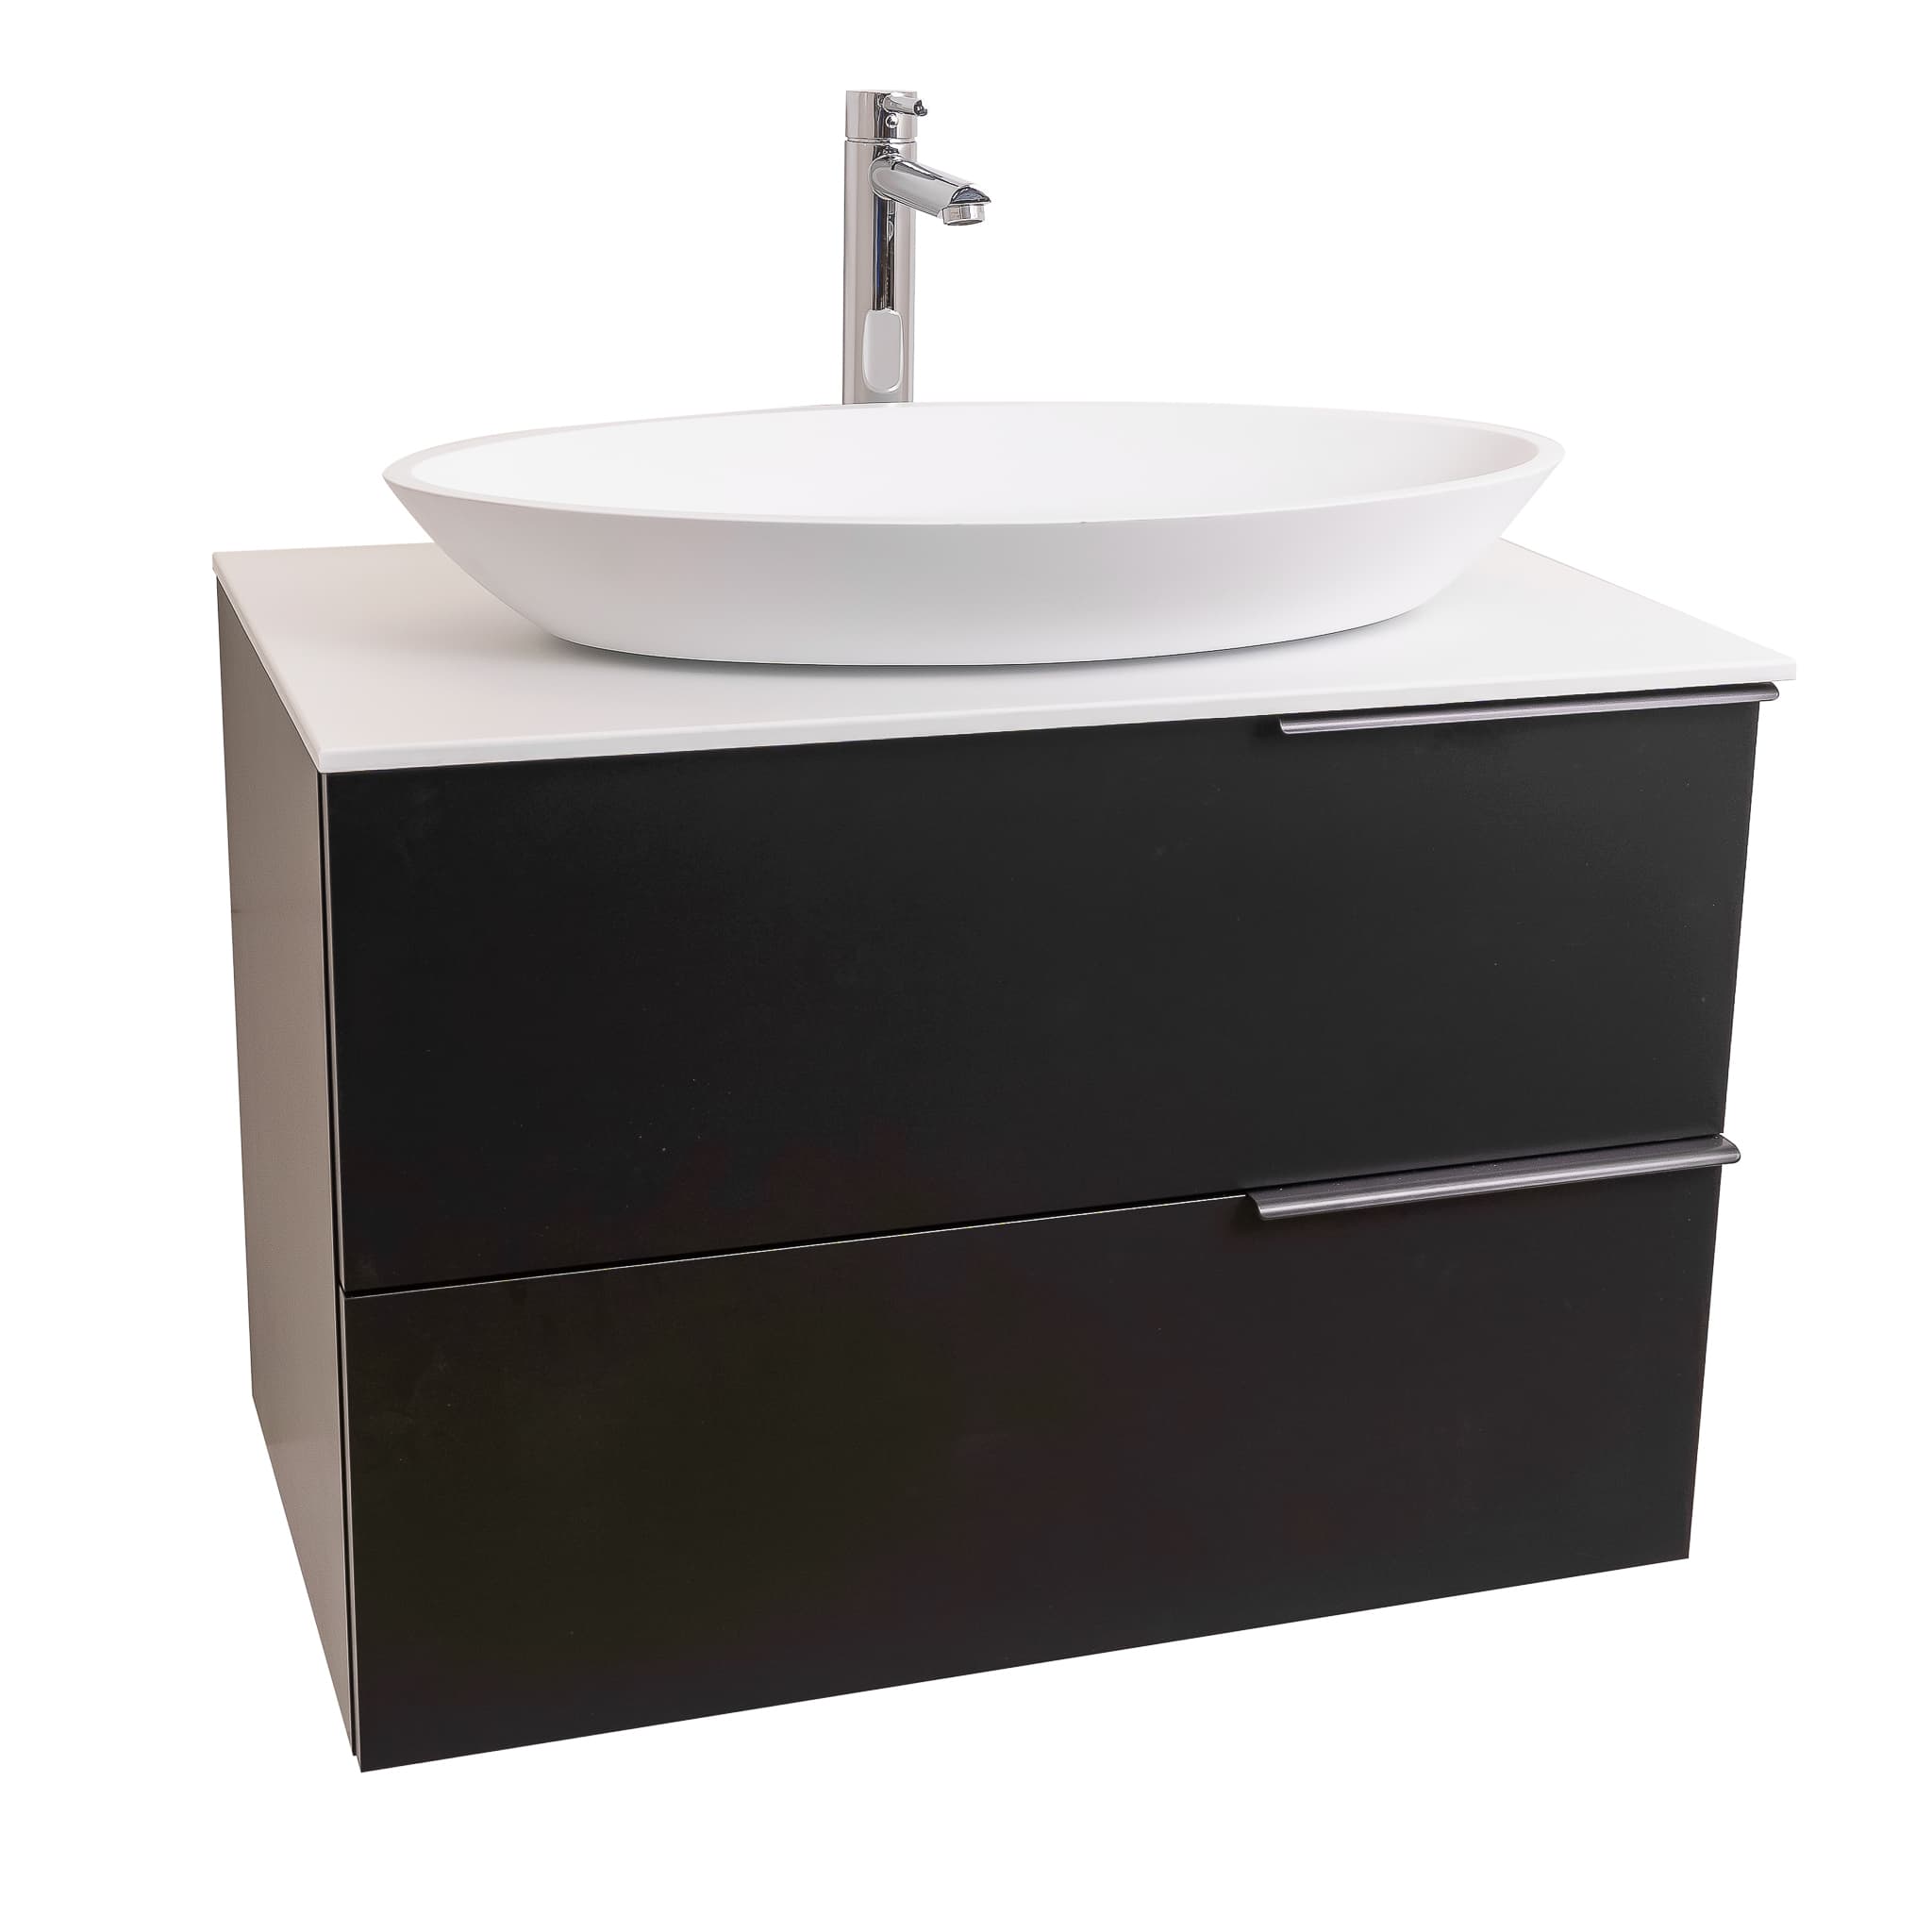 Mallorca 31.5 Matte Black Cabinet, Solid Surface Flat White Counter And Oval Solid Surface White Basin 1305, Wall Mounted Modern Vanity Set